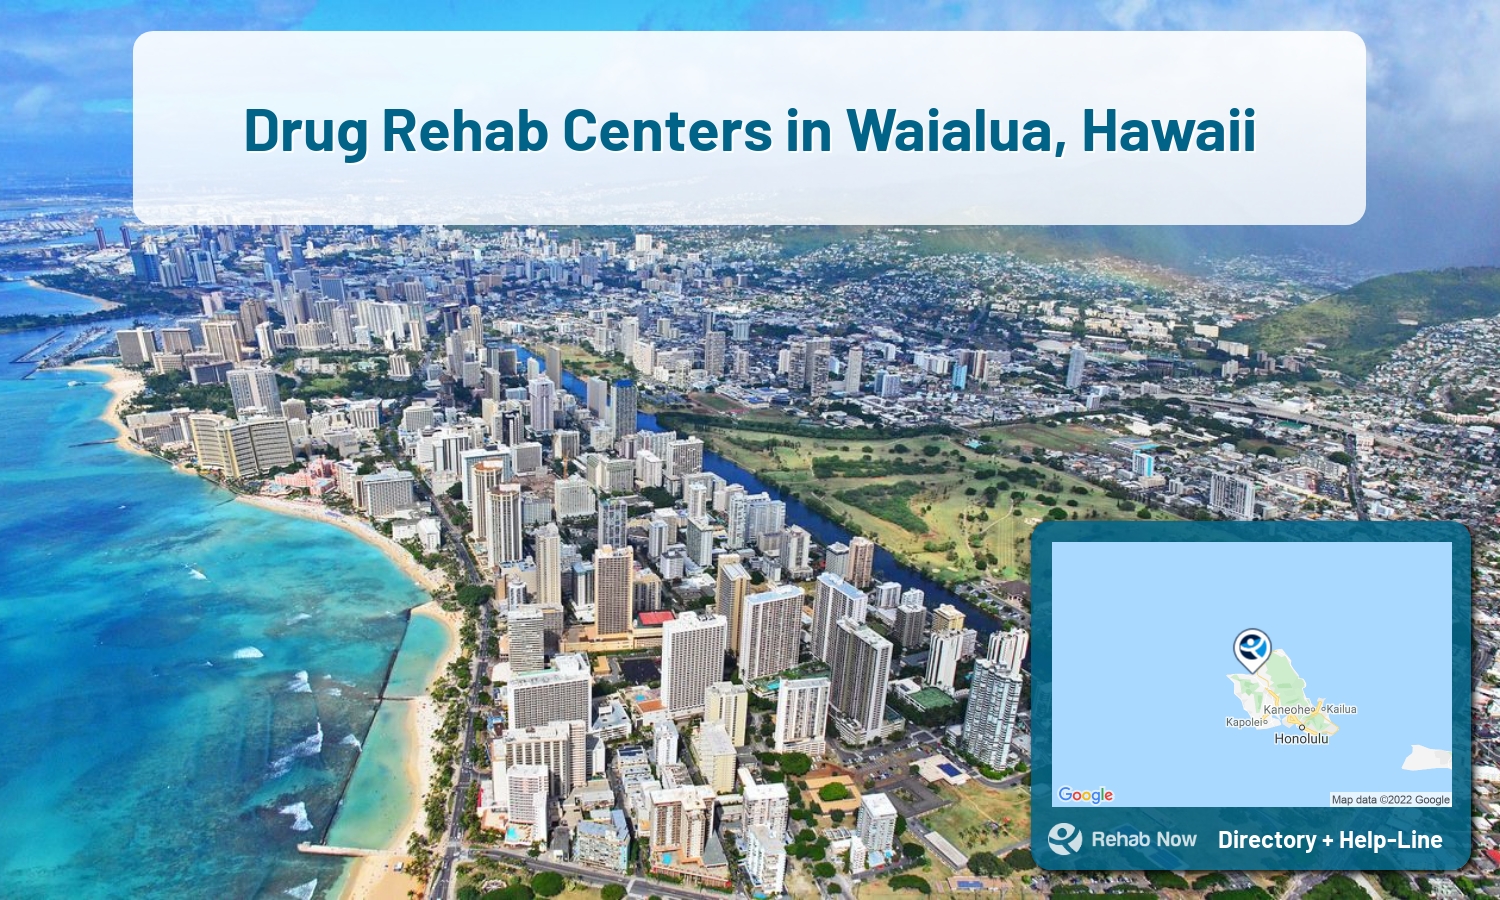 Let our expert counselors help find the best addiction treatment in Waialua, Hawaii now with a free call to our hotline.